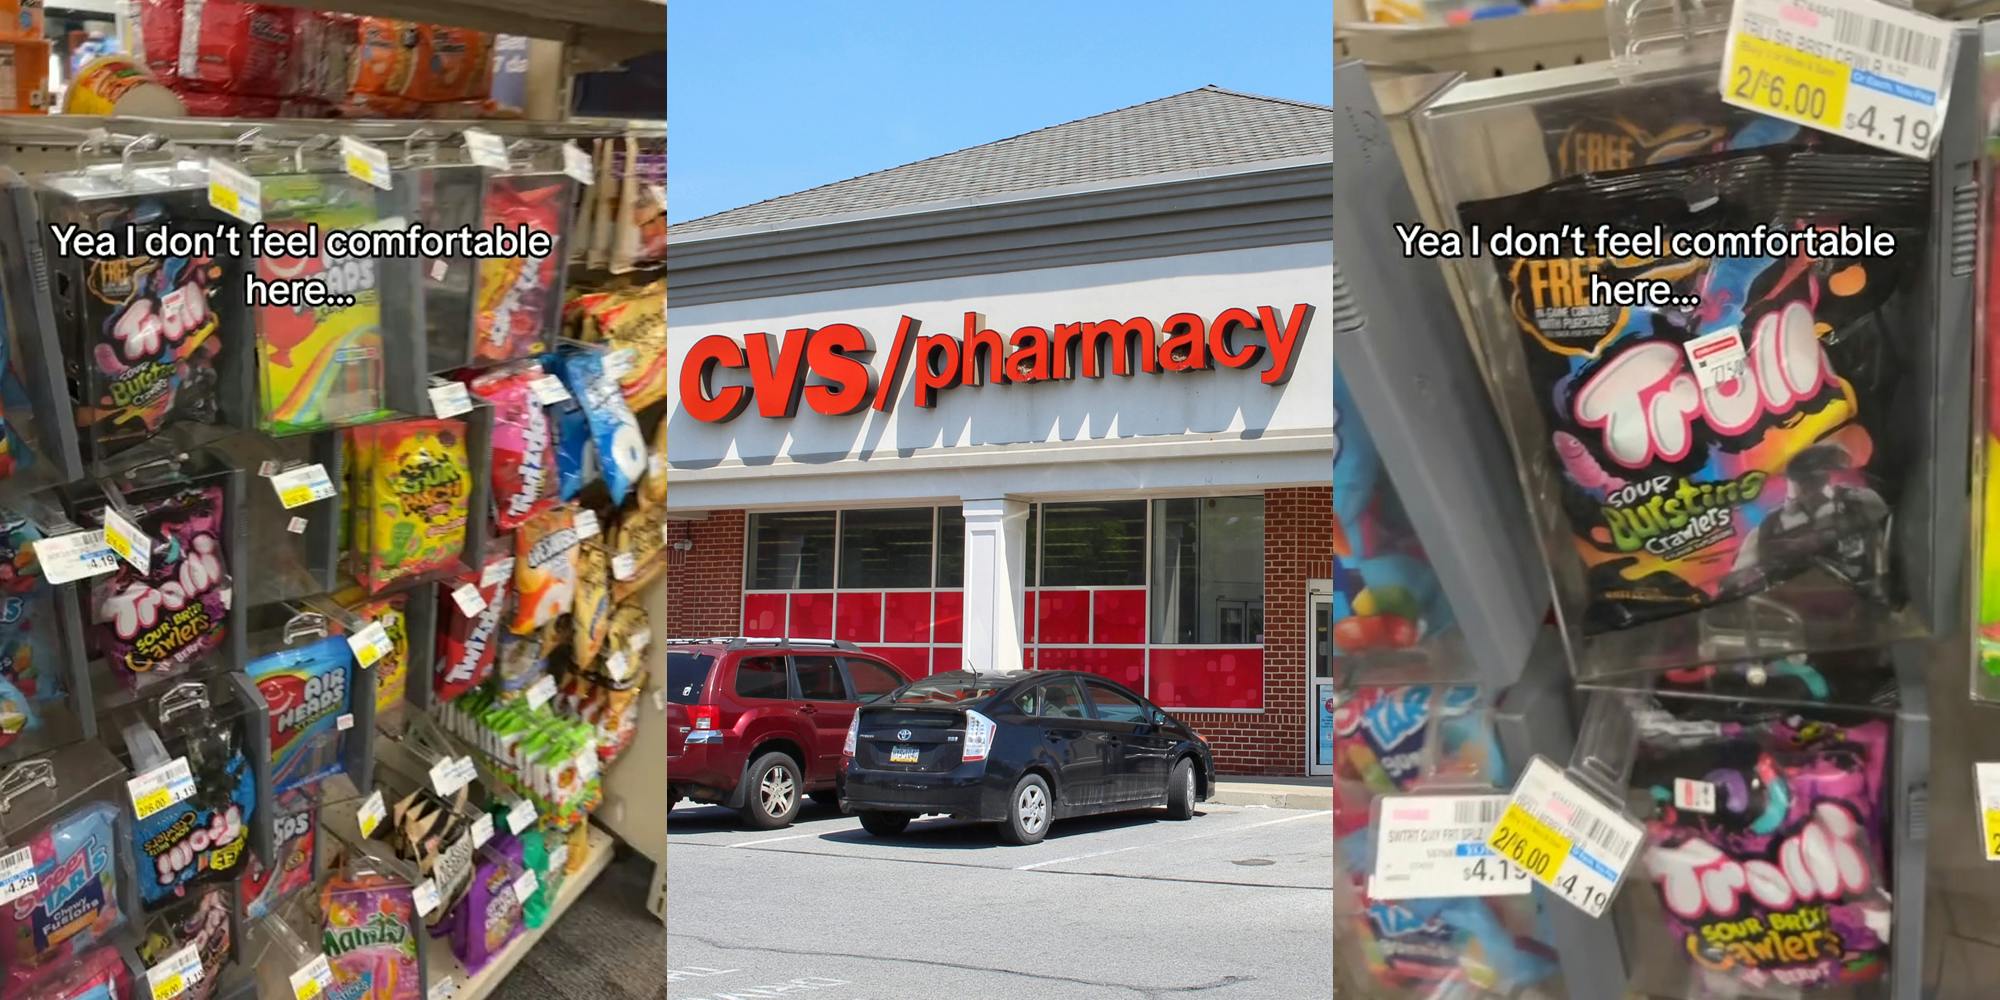 CVS candy aisle with items locked in clear containers with caption "Yea I don't feel comfortable here..." (l) CVS store with sign (c) CVS candy aisle with items locked in clear containers with caption "Yea I don't feel comfortable here..." (r)